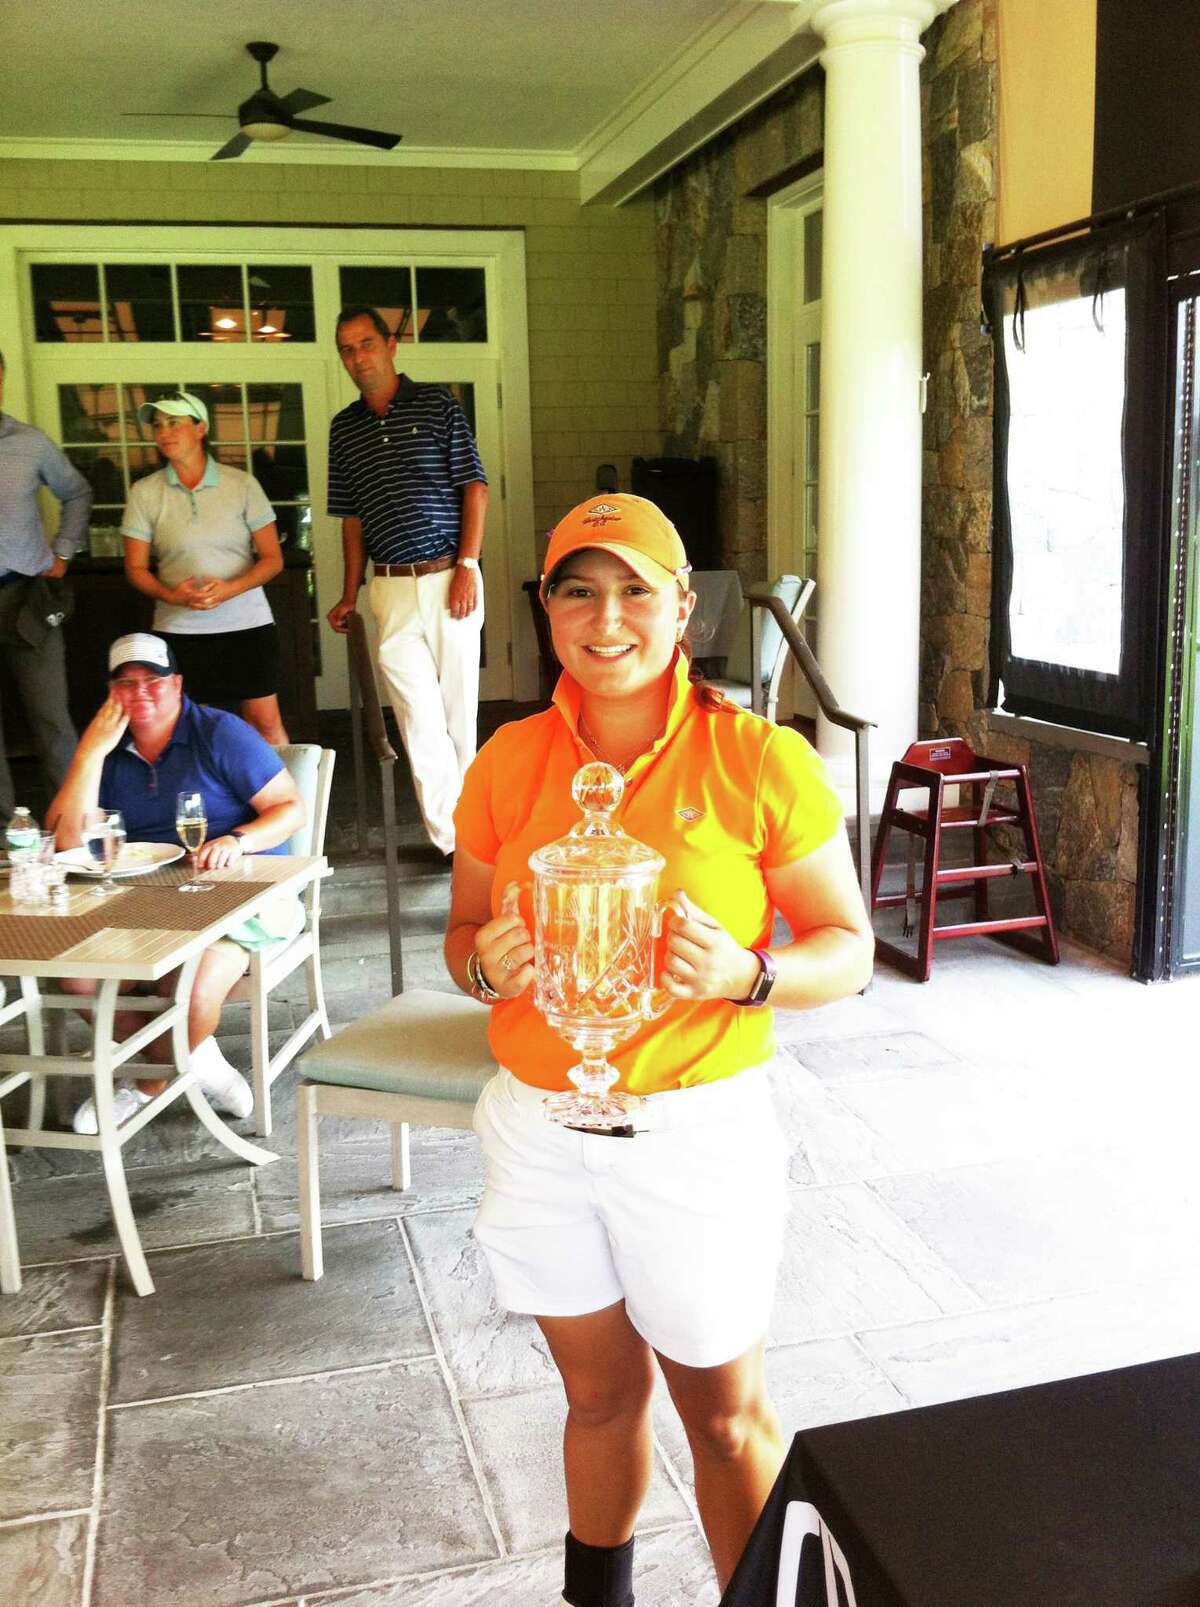 McDaid wins Womens Met Open Championship for second straight year pic